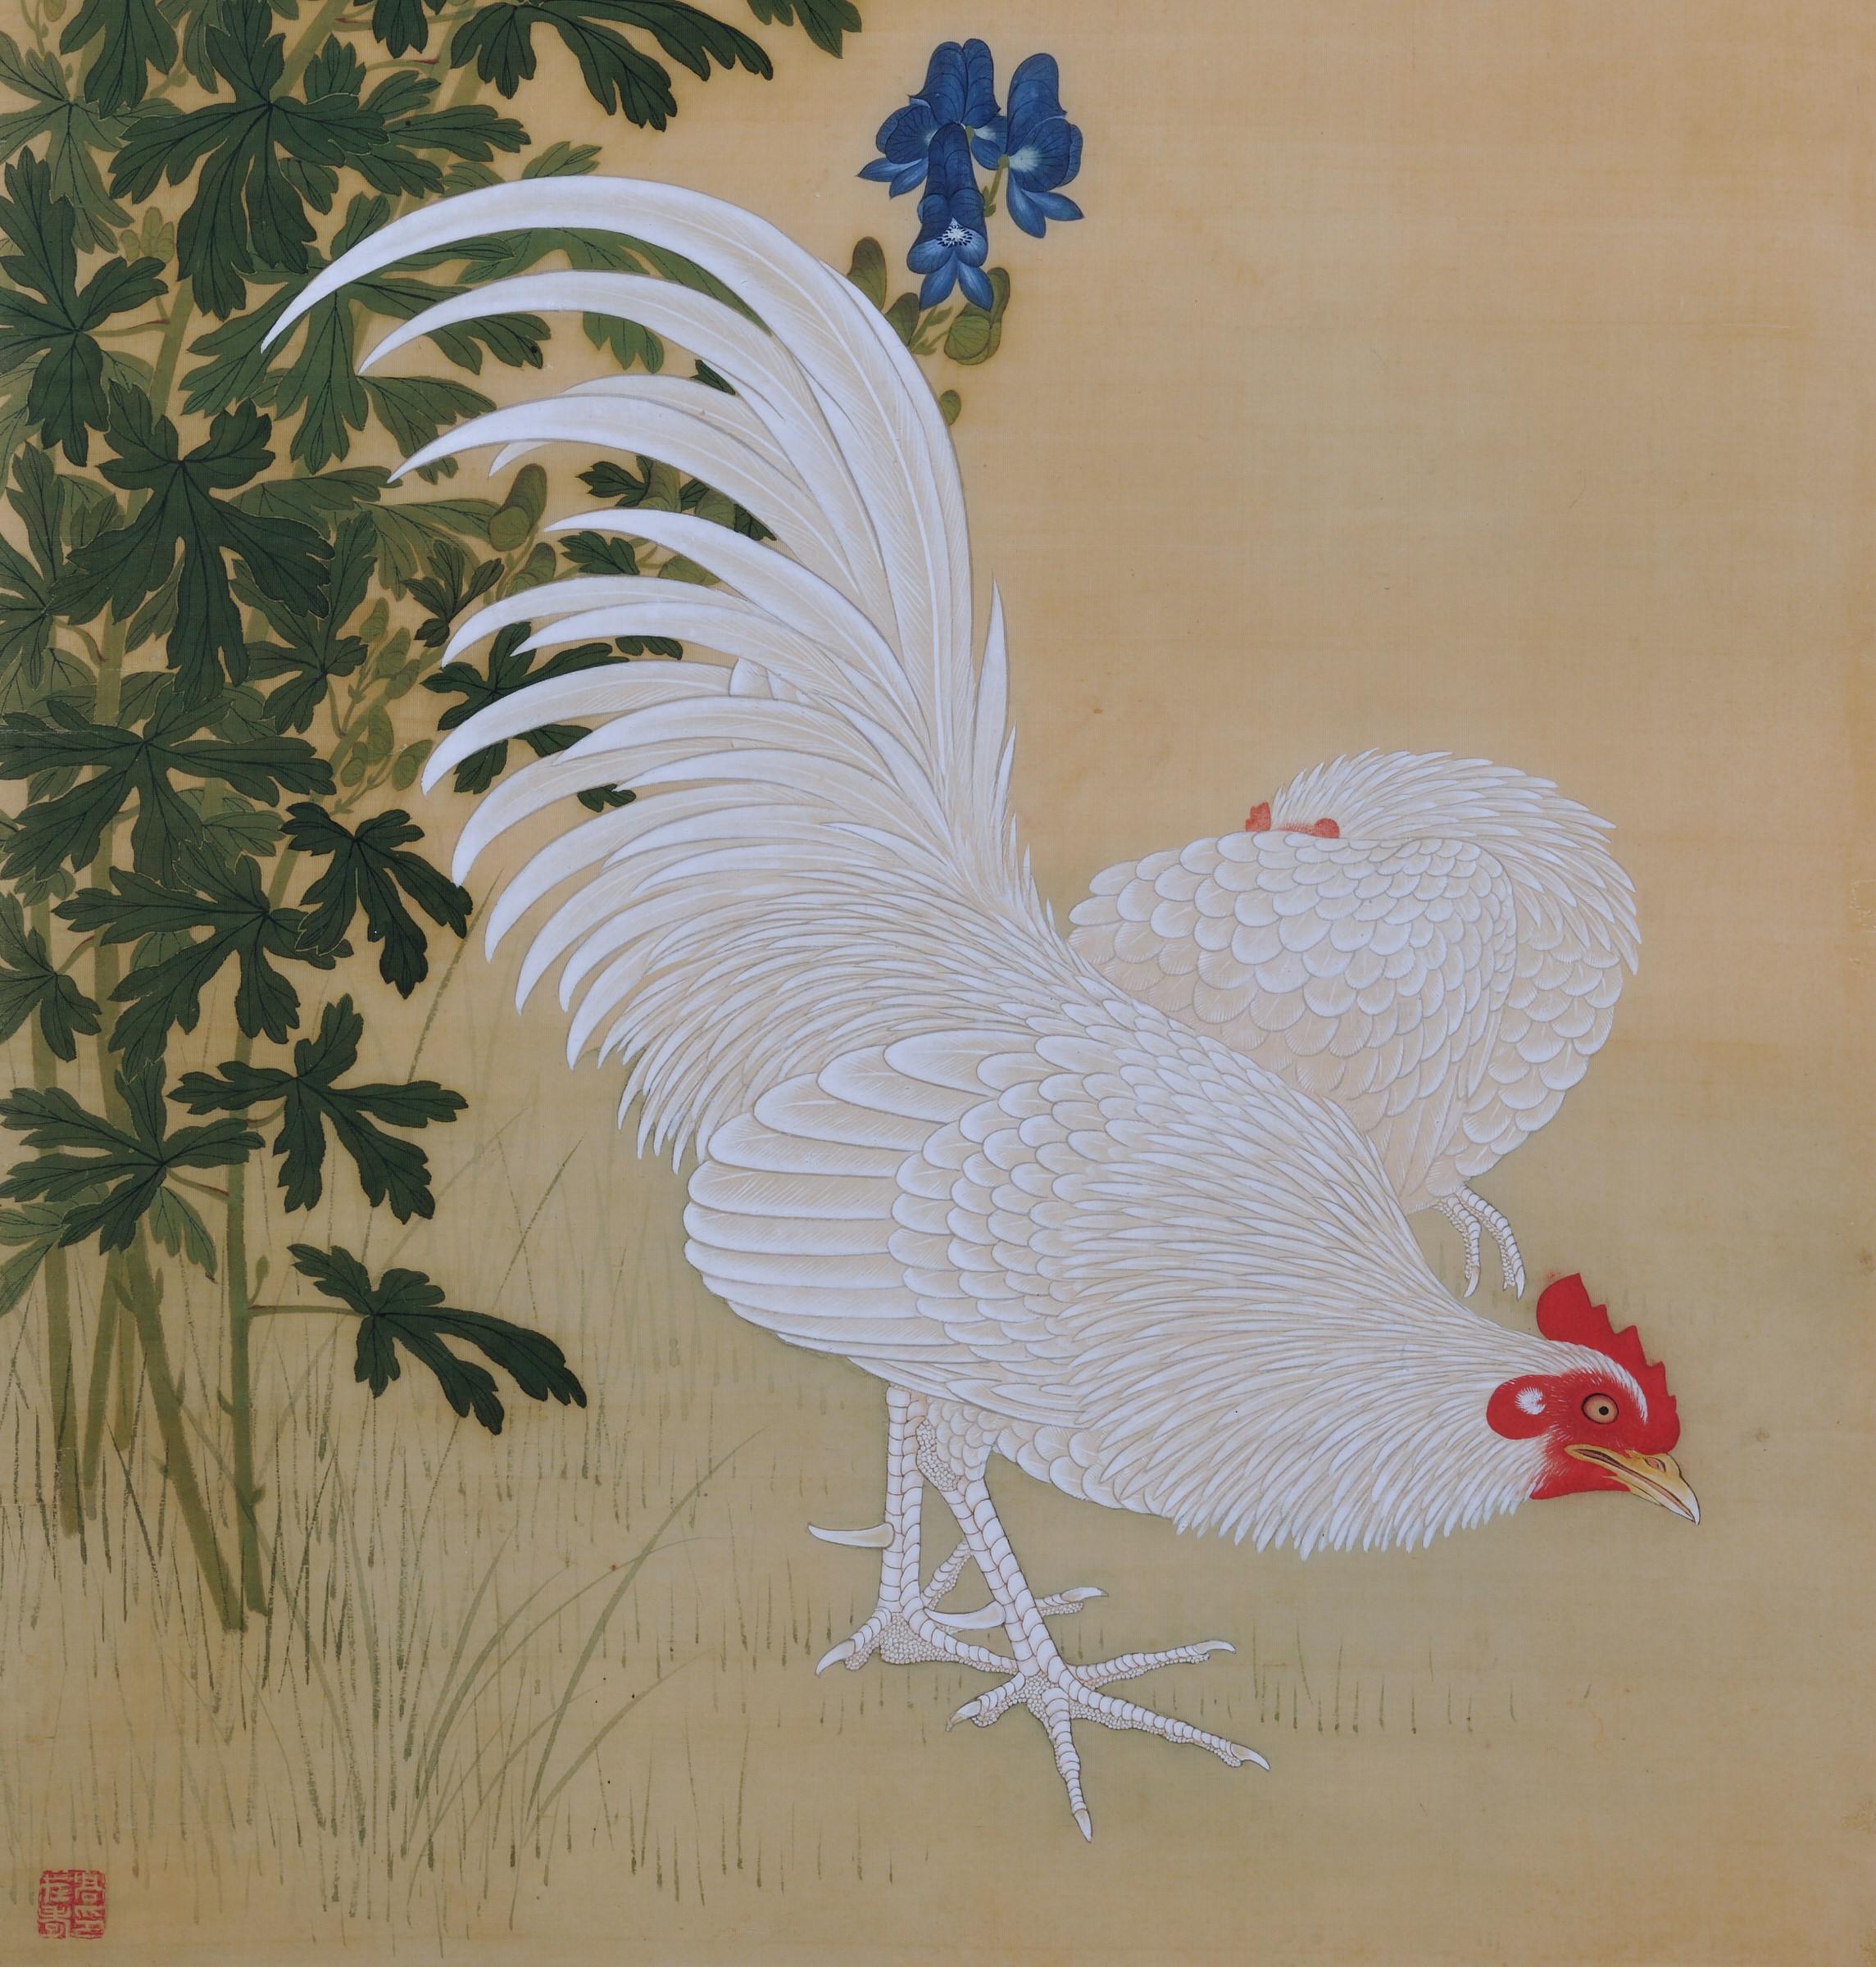 Takakura Zaiko (fl.1854-1860)

Birds and flowers of the seasons

Rooster, Hen and Wolf’s Bane

Ink and color on silk

Unframed

Seal: Taka Zaiko no in 

Dimensions:

H 39” x W 16.5” (100 cm x 42.5 cm)

Bird and flower paintings by